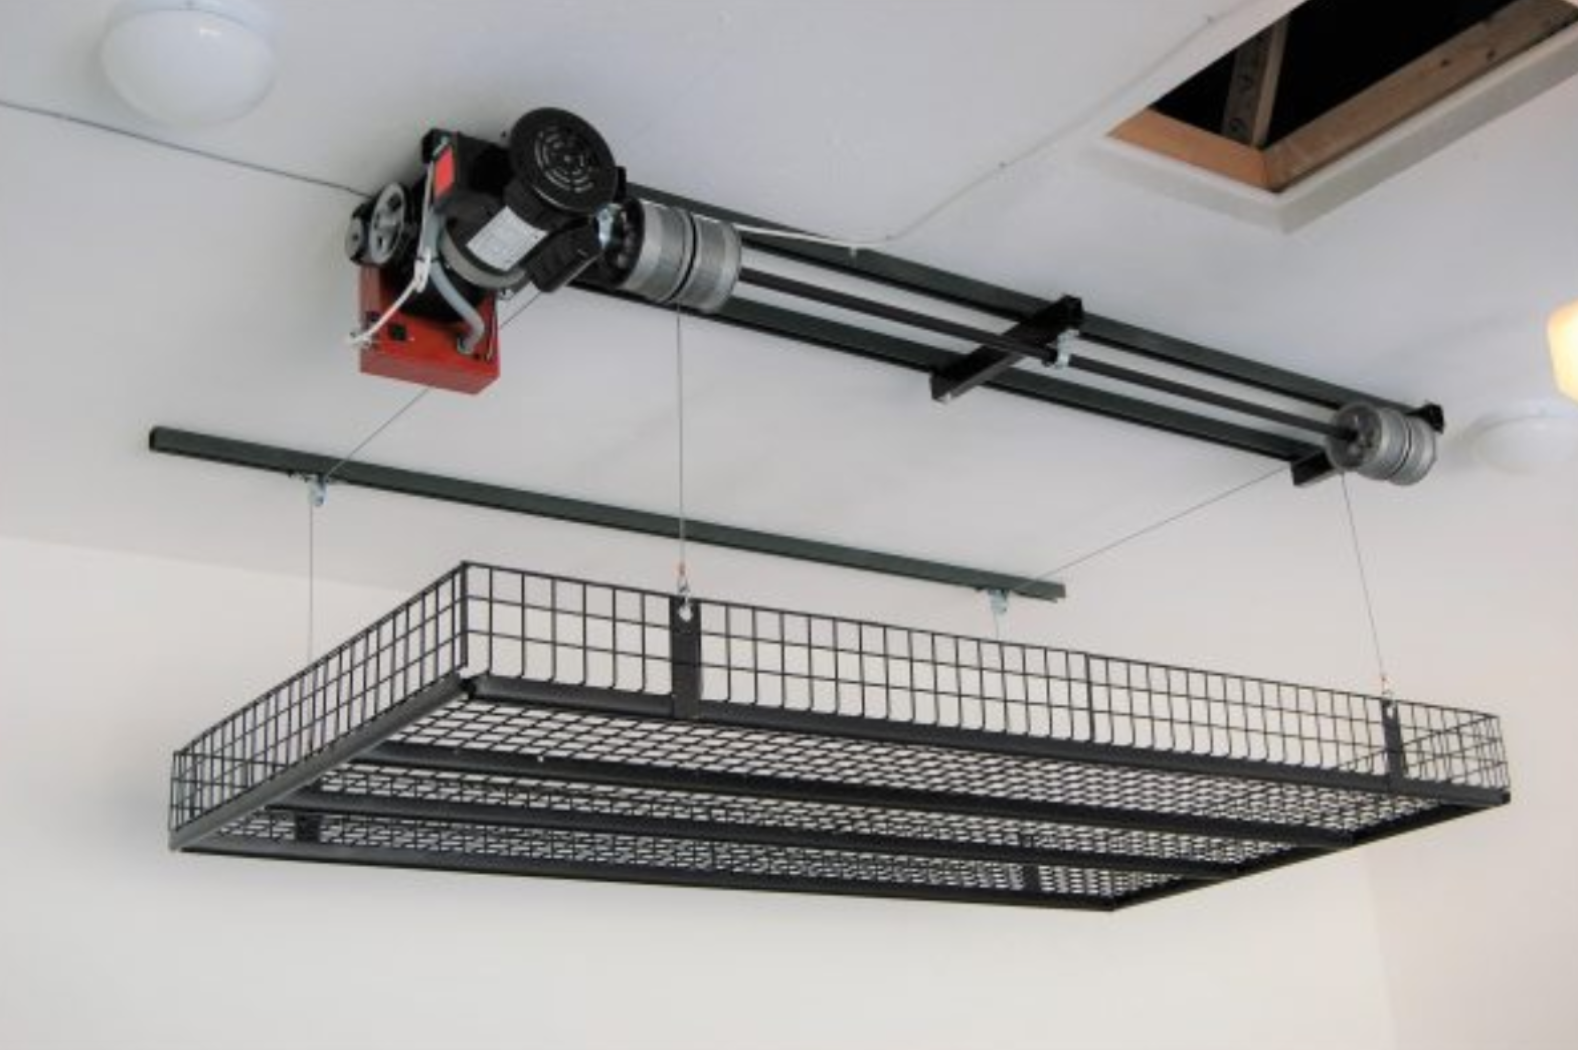 Make Use Of Your Garage Room With These Garage Ceiling Storage Lifts